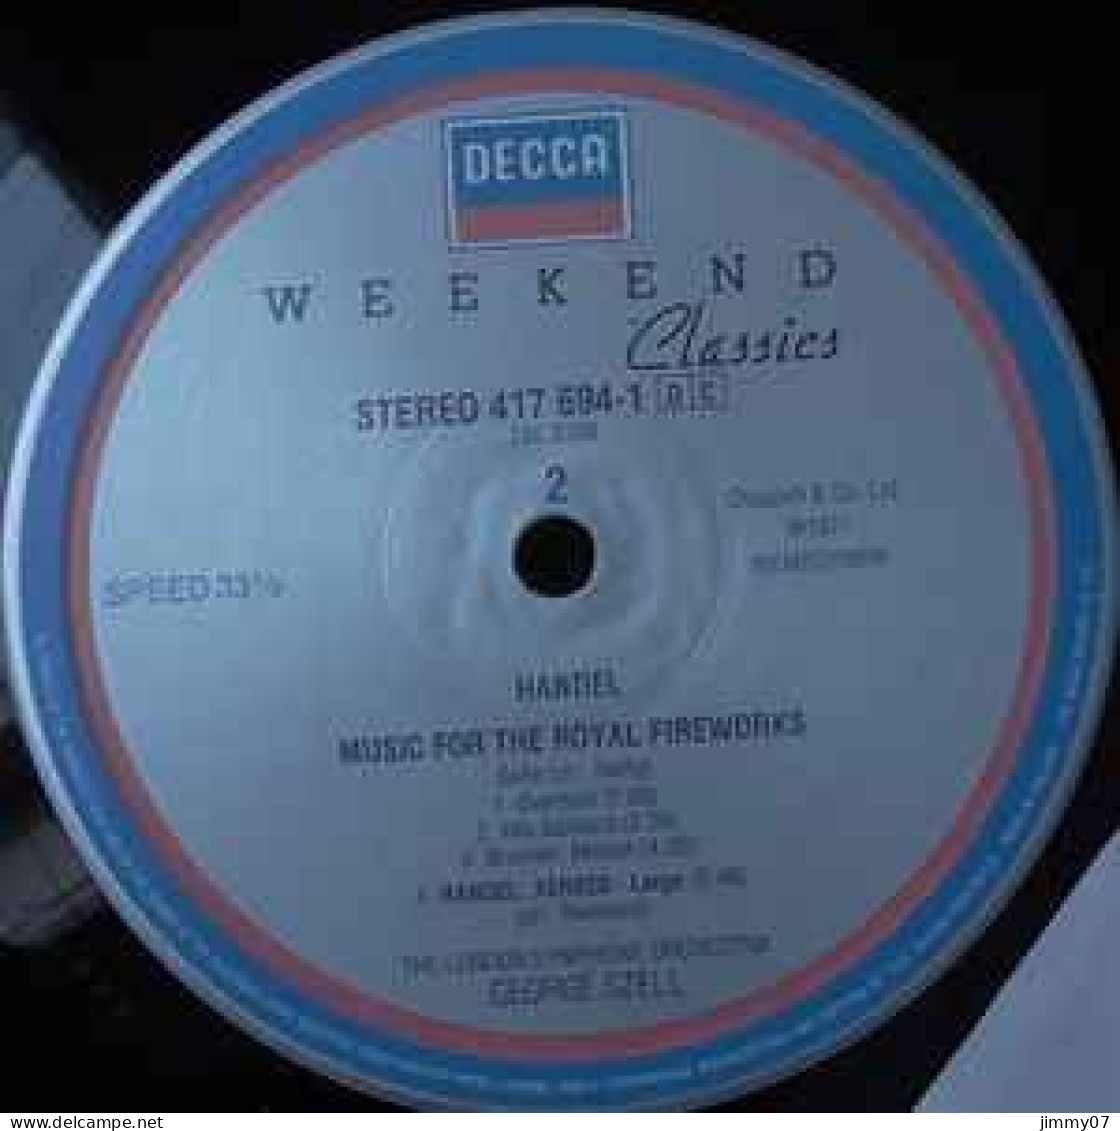 Handel, George Szell - The Water Music / Royal Fireworks Music (LP, Album, RE) - Classical